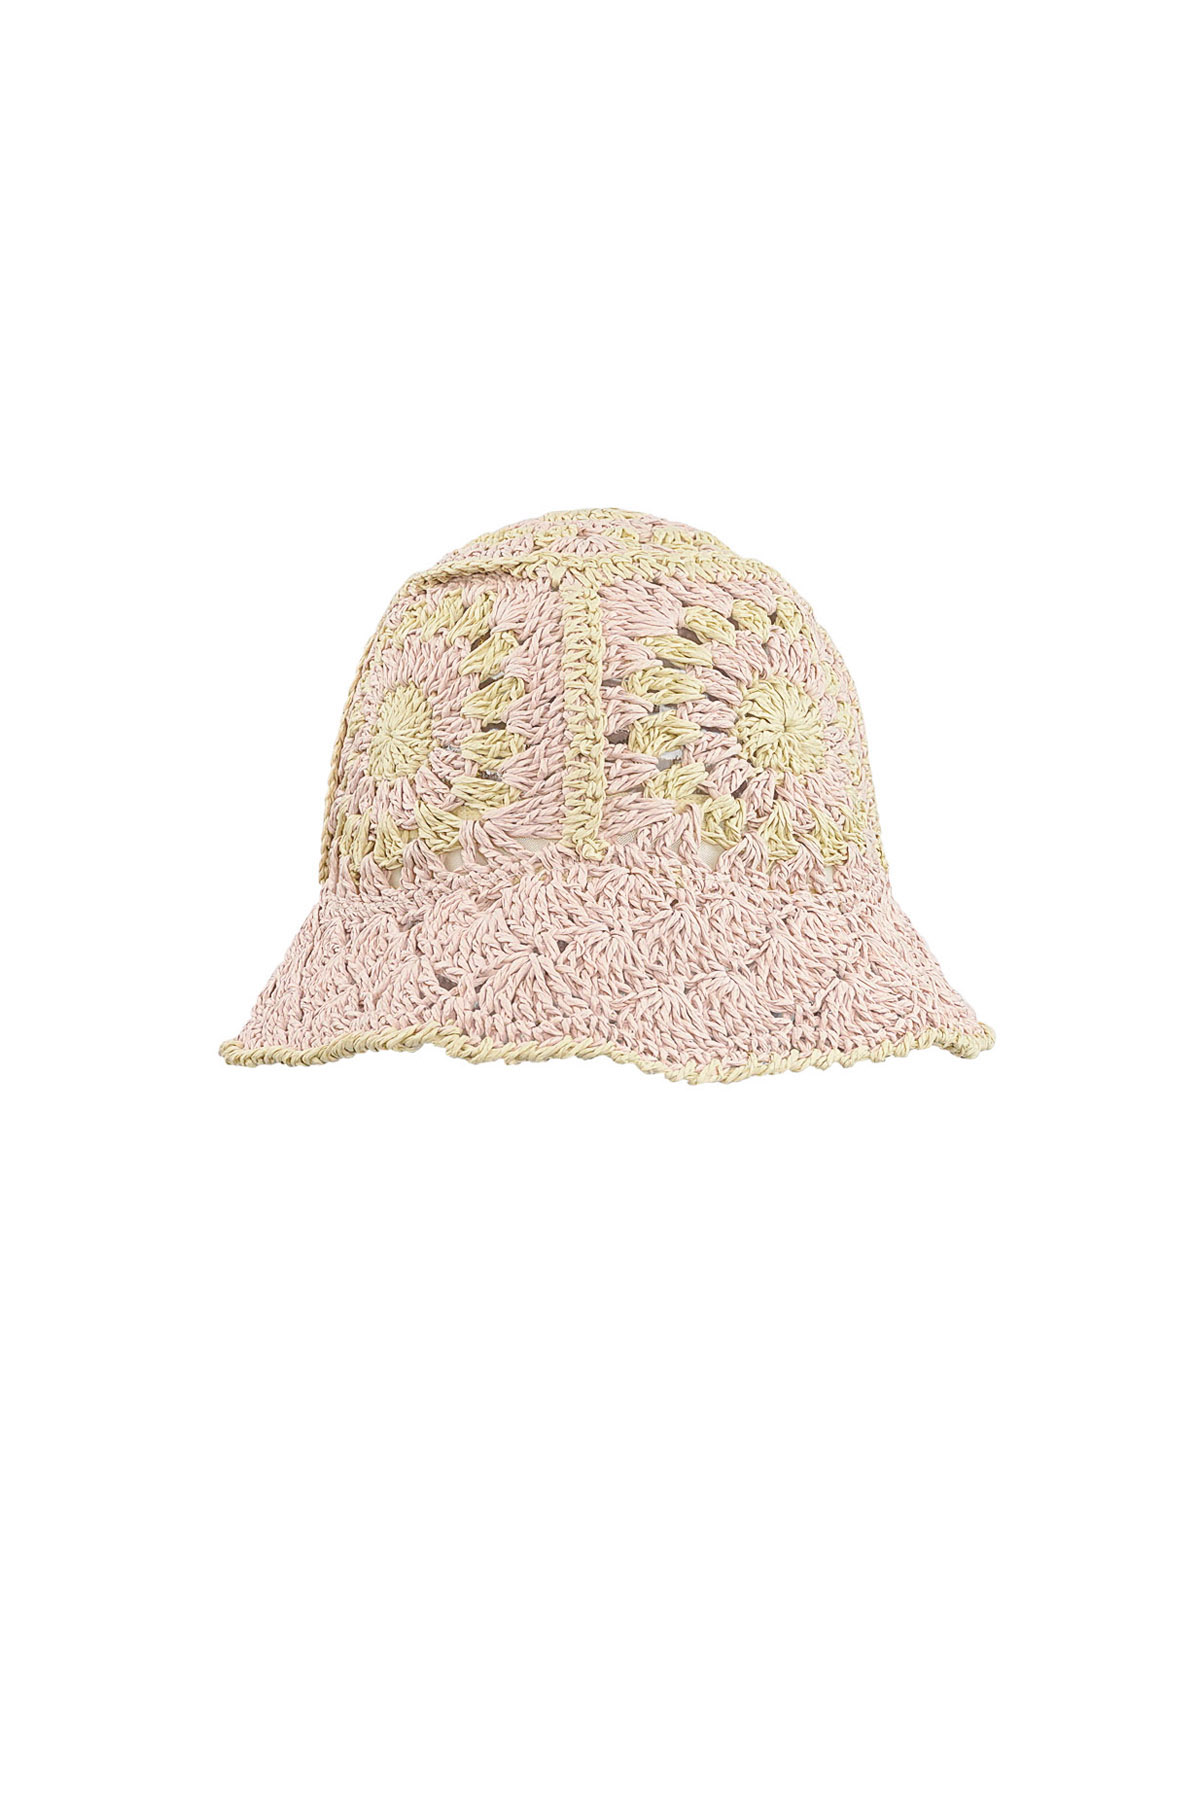 Crochet hat with flowers - pink